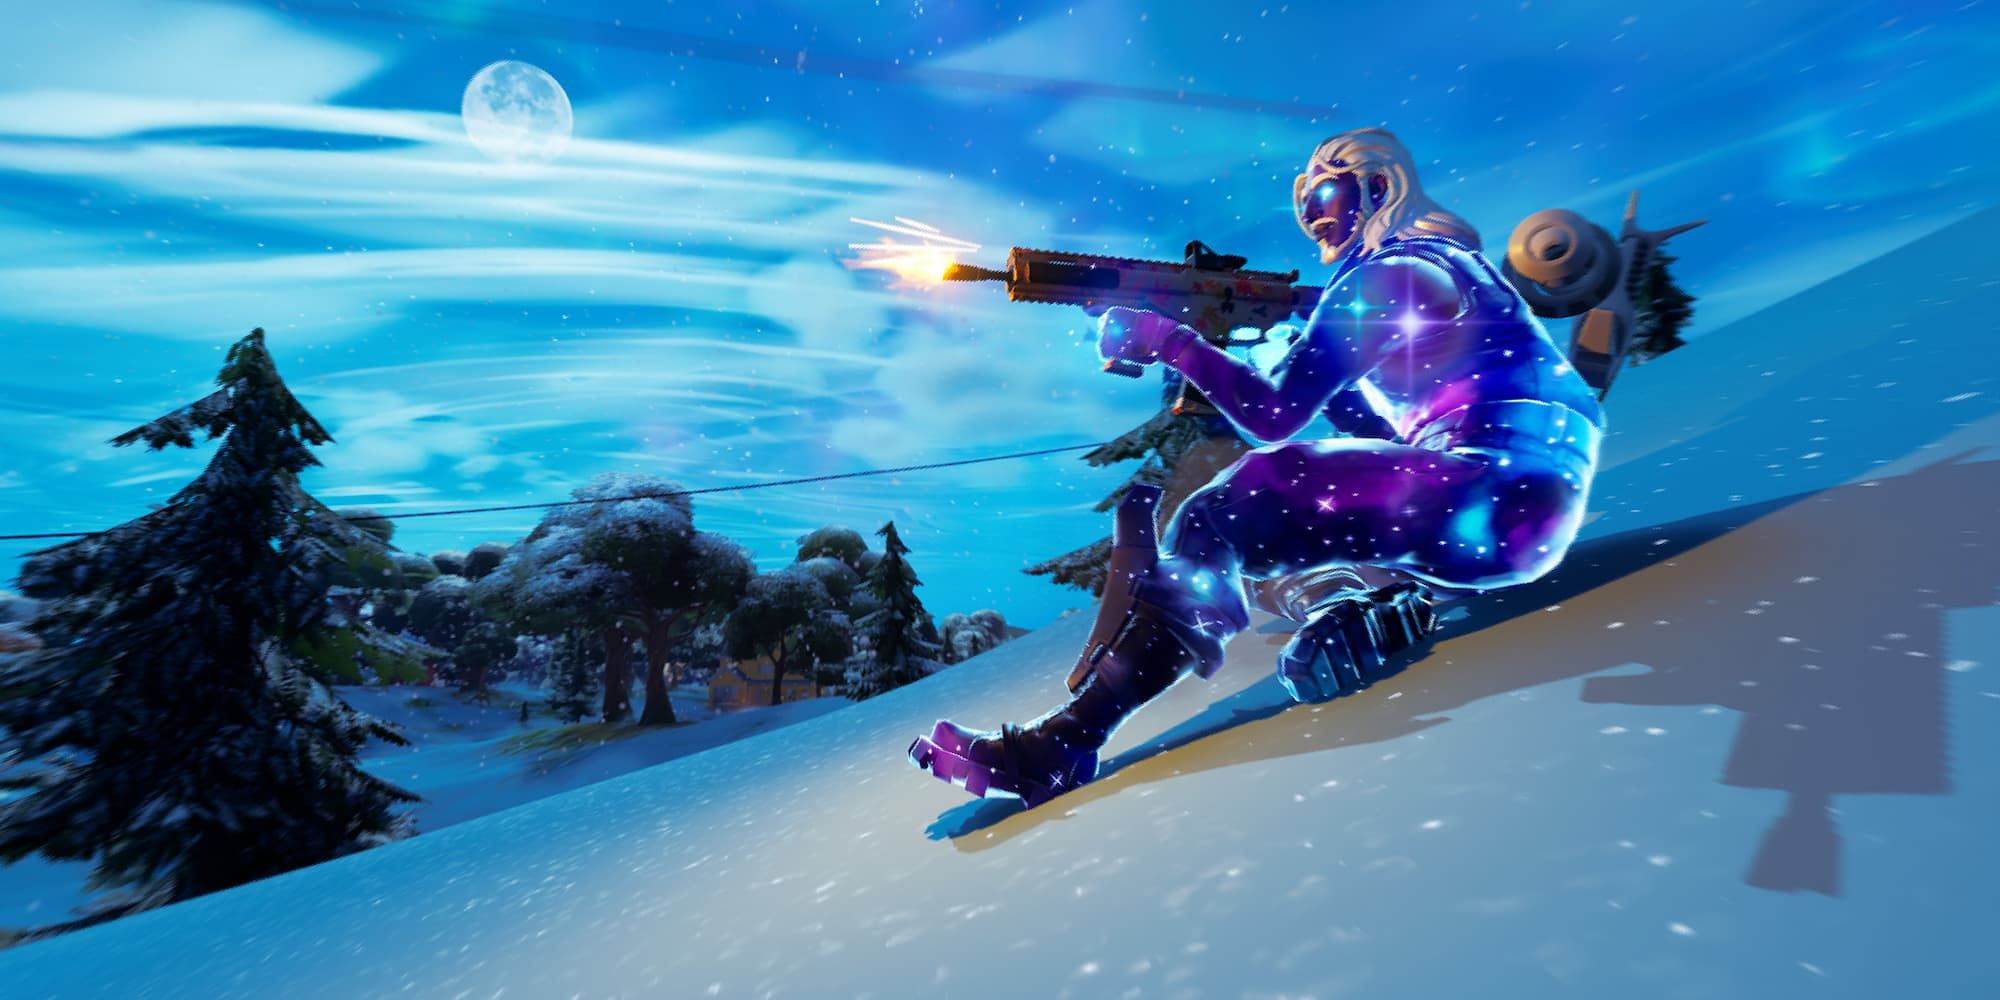 The Galaxy skin slides down a snow-covered hill while firing its weapon in Fortnite.